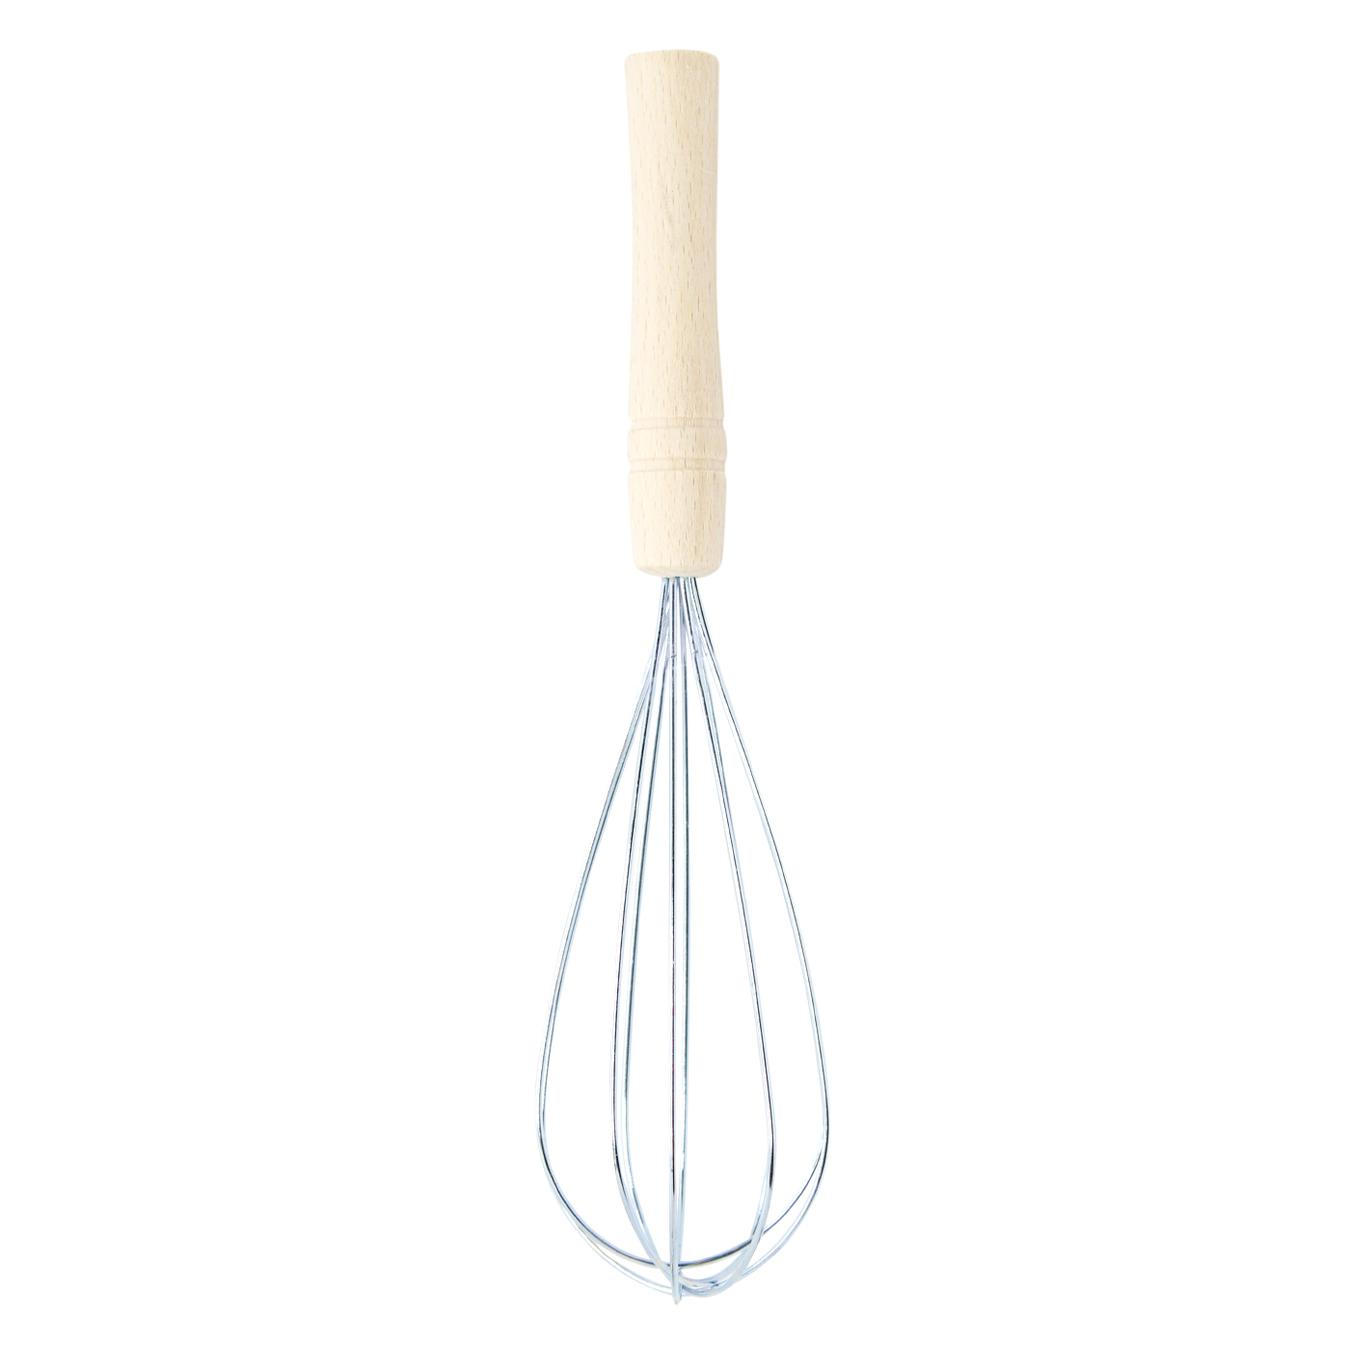 A whisk with a wooden handle